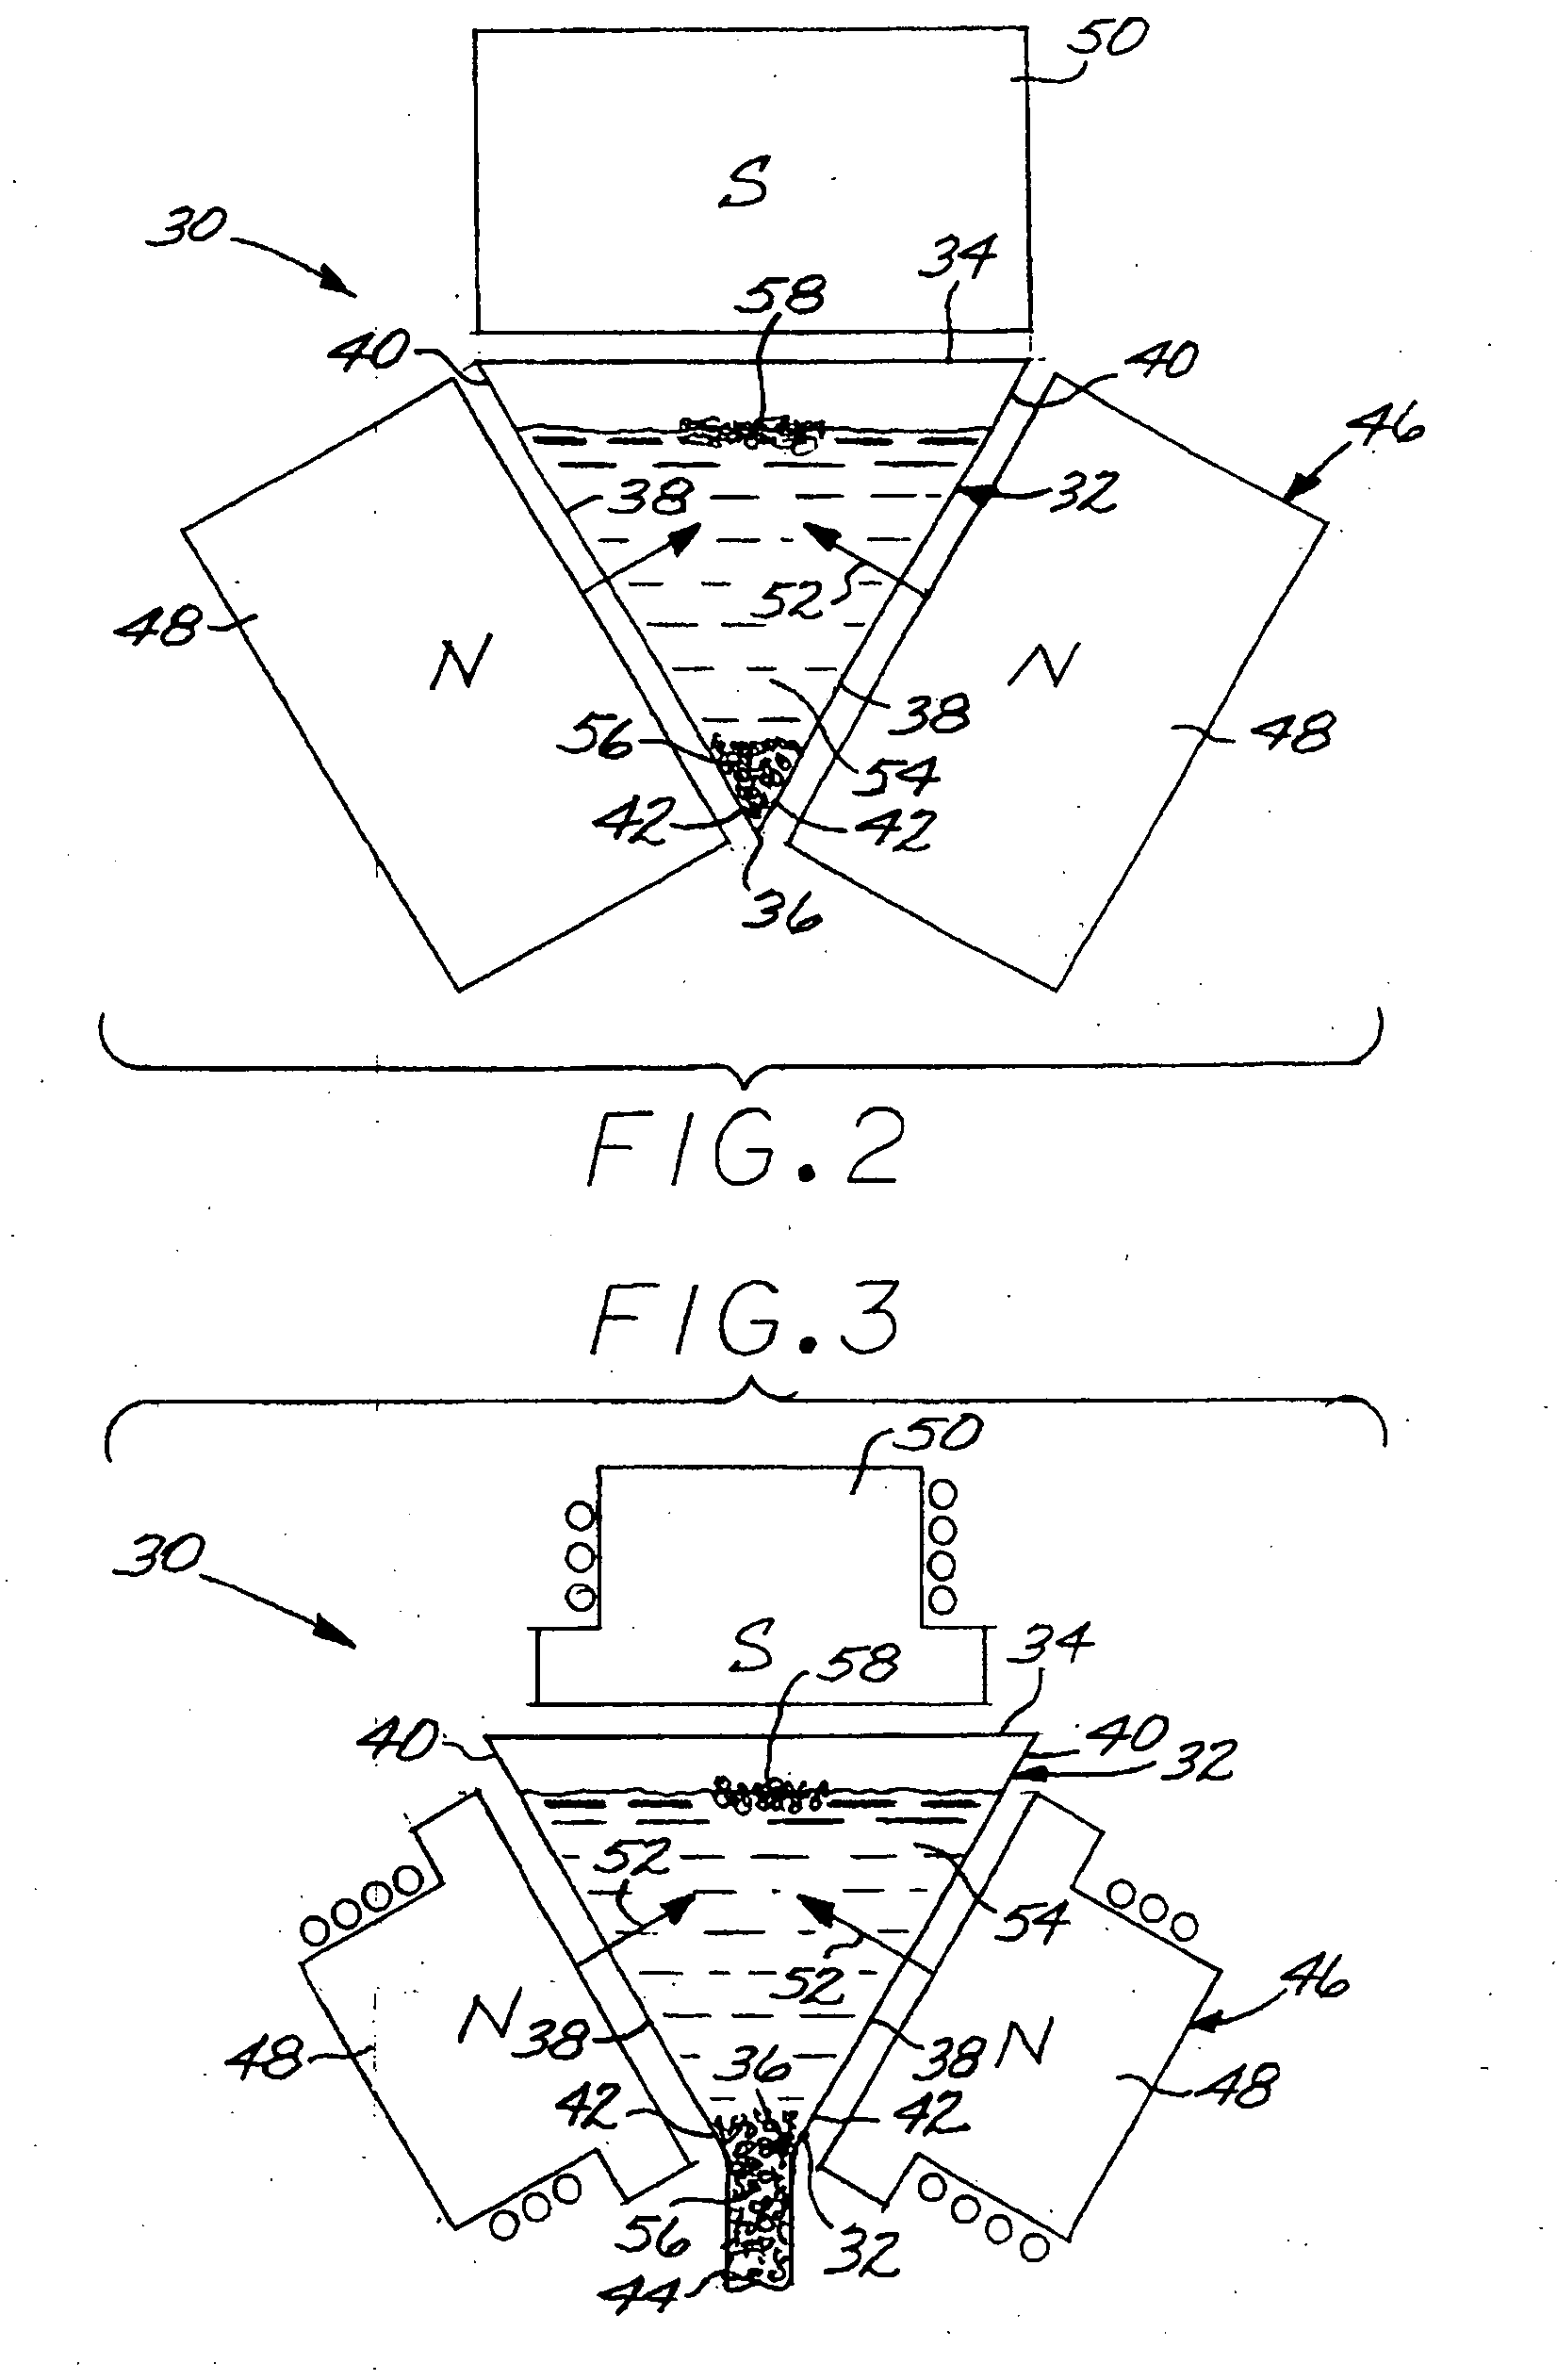 Method for magnetic/ferrofluid separation of particle fractions